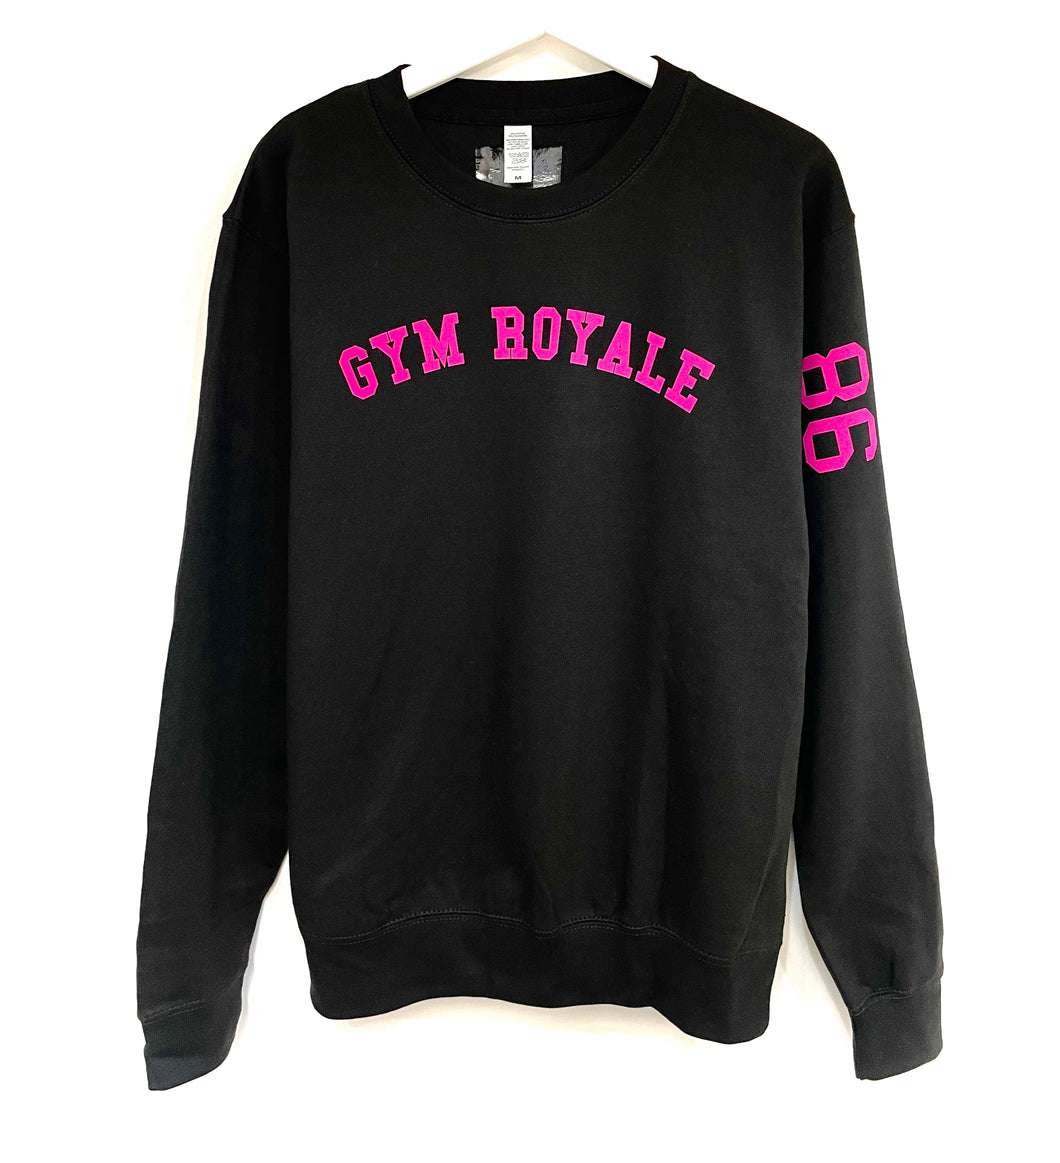 Gym Royale® Curve 86 Made To Conquer Sweatshirt - Black/Pink